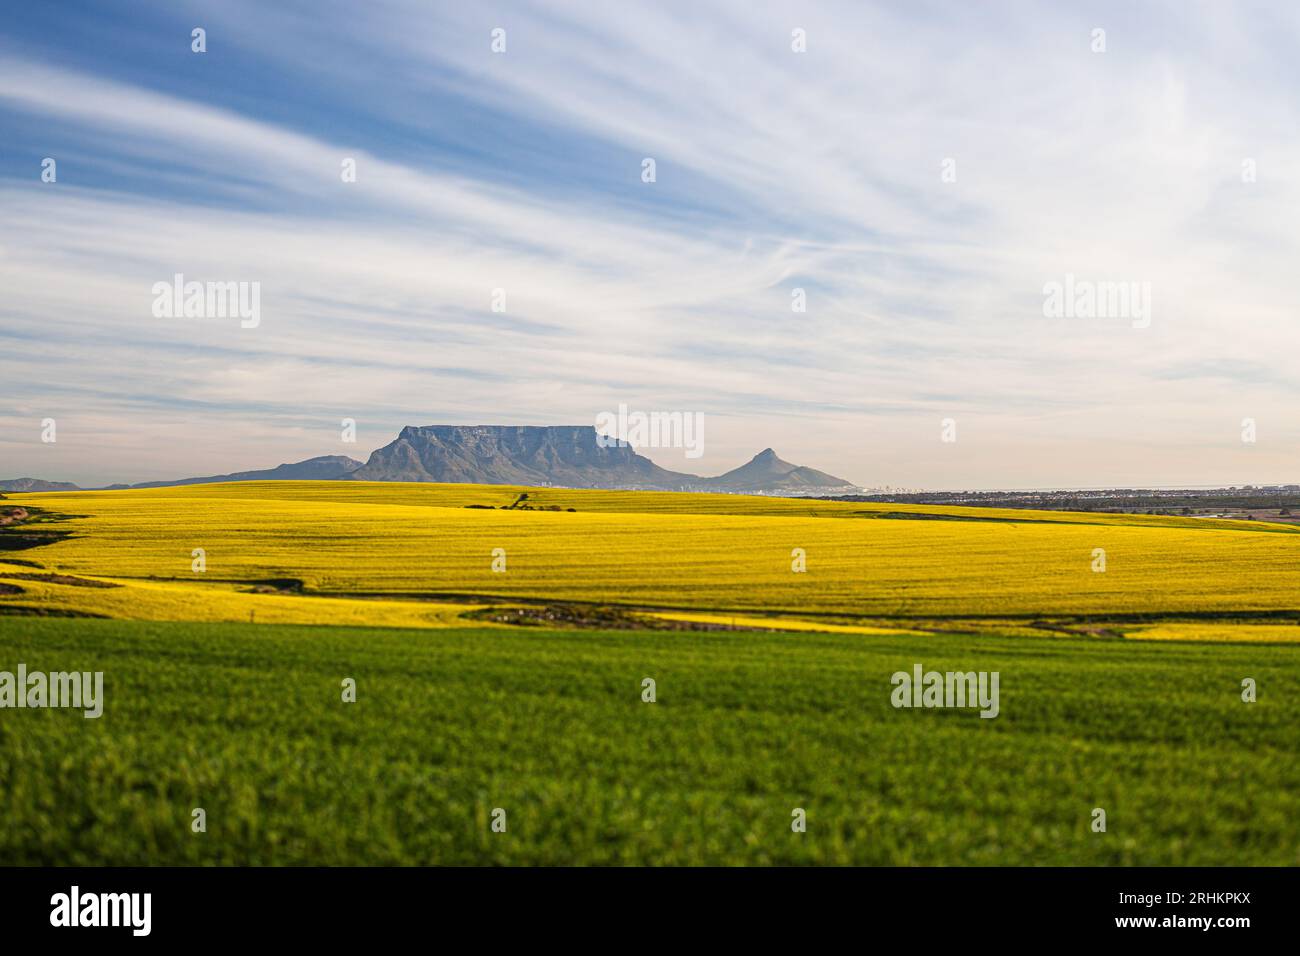 Table Mountain landscape photograph with canola and wheat crops in the foreground with beautiful clouds travel tourism farming Cape Town Stock Photo